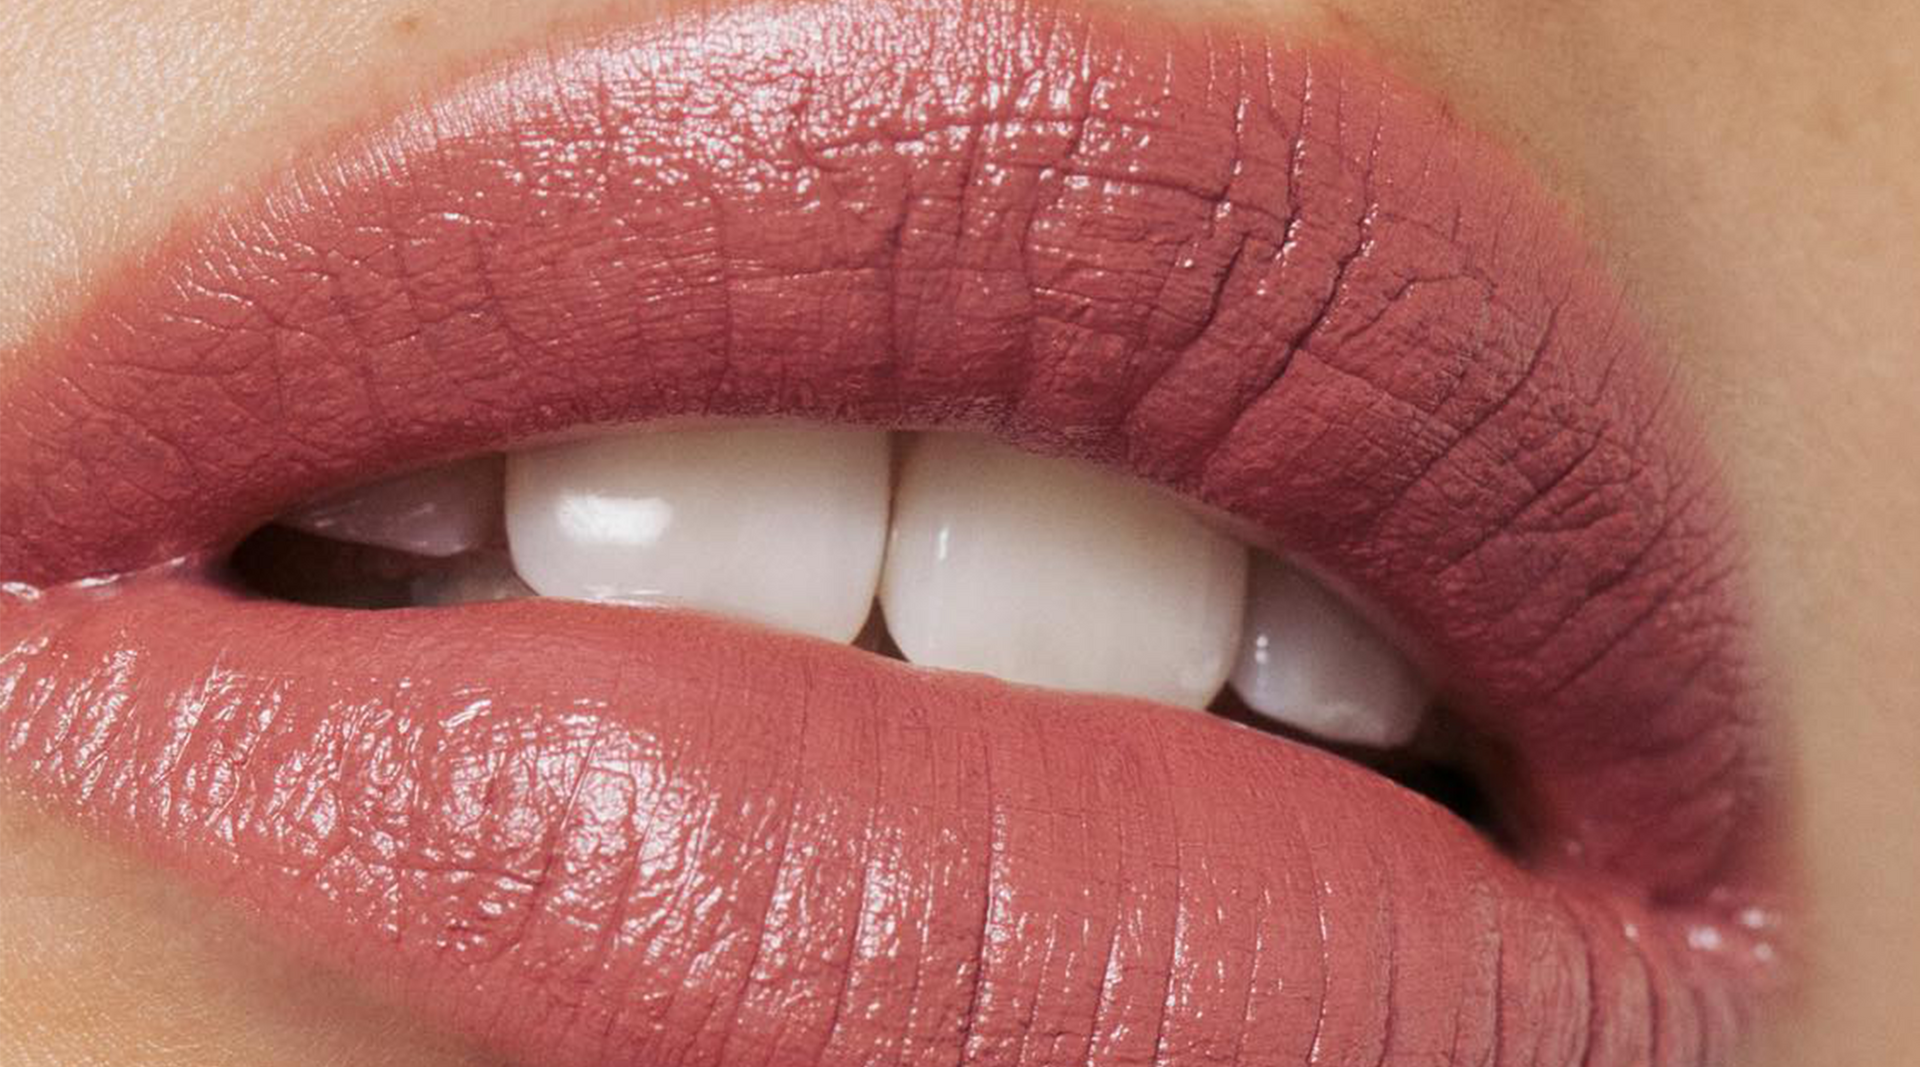 A Derm’s Guide to Treating Dry, Cracked Lips